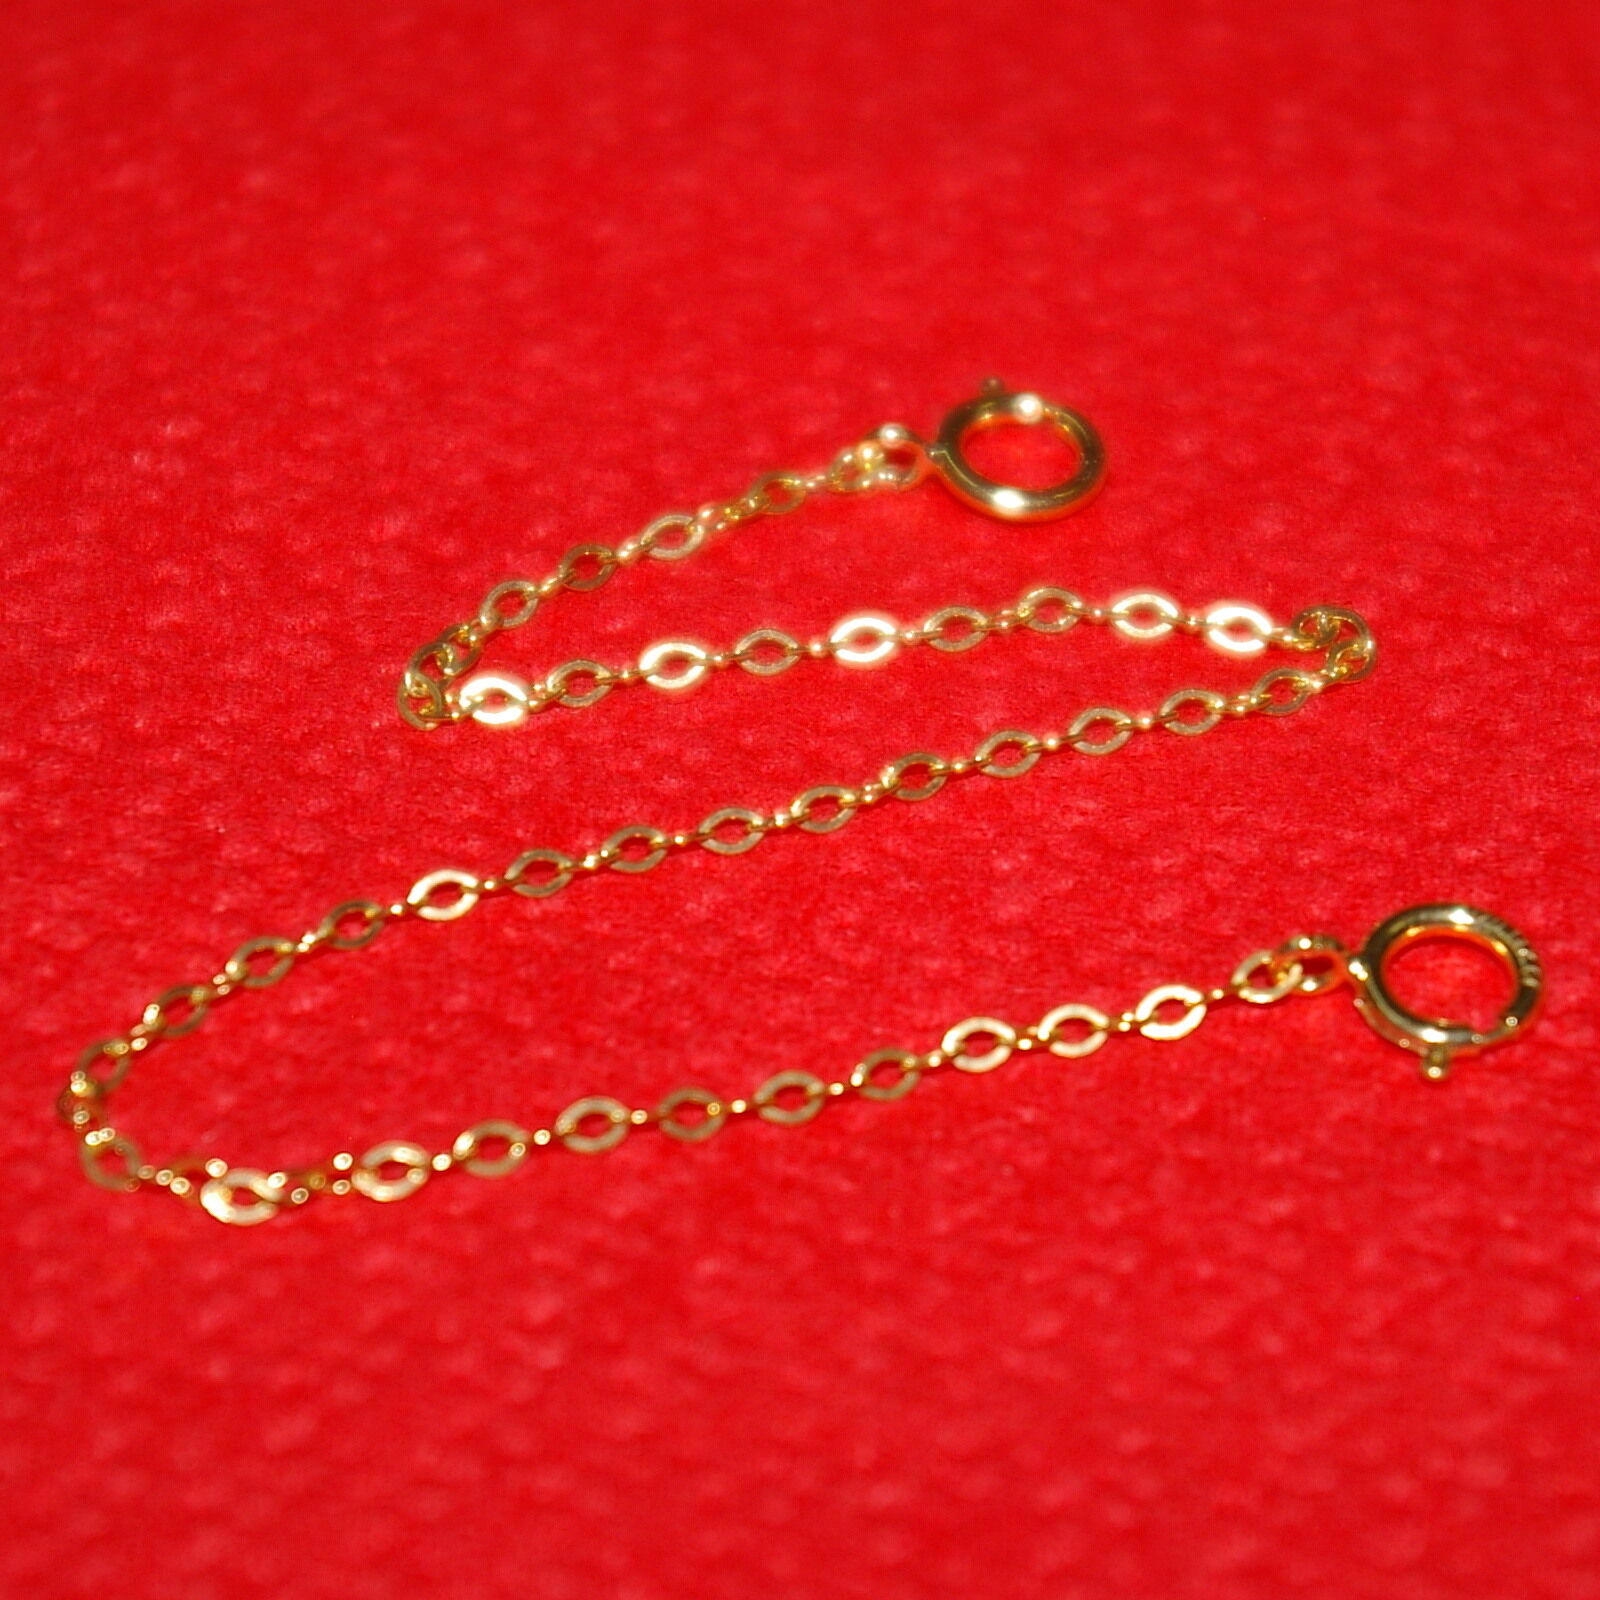 5 pcs 14kt GOLD FILLED 1.5x2mm Flat Cable Chain EXTENDERS with Two Spring Clasps BalliSilver - фотография #12